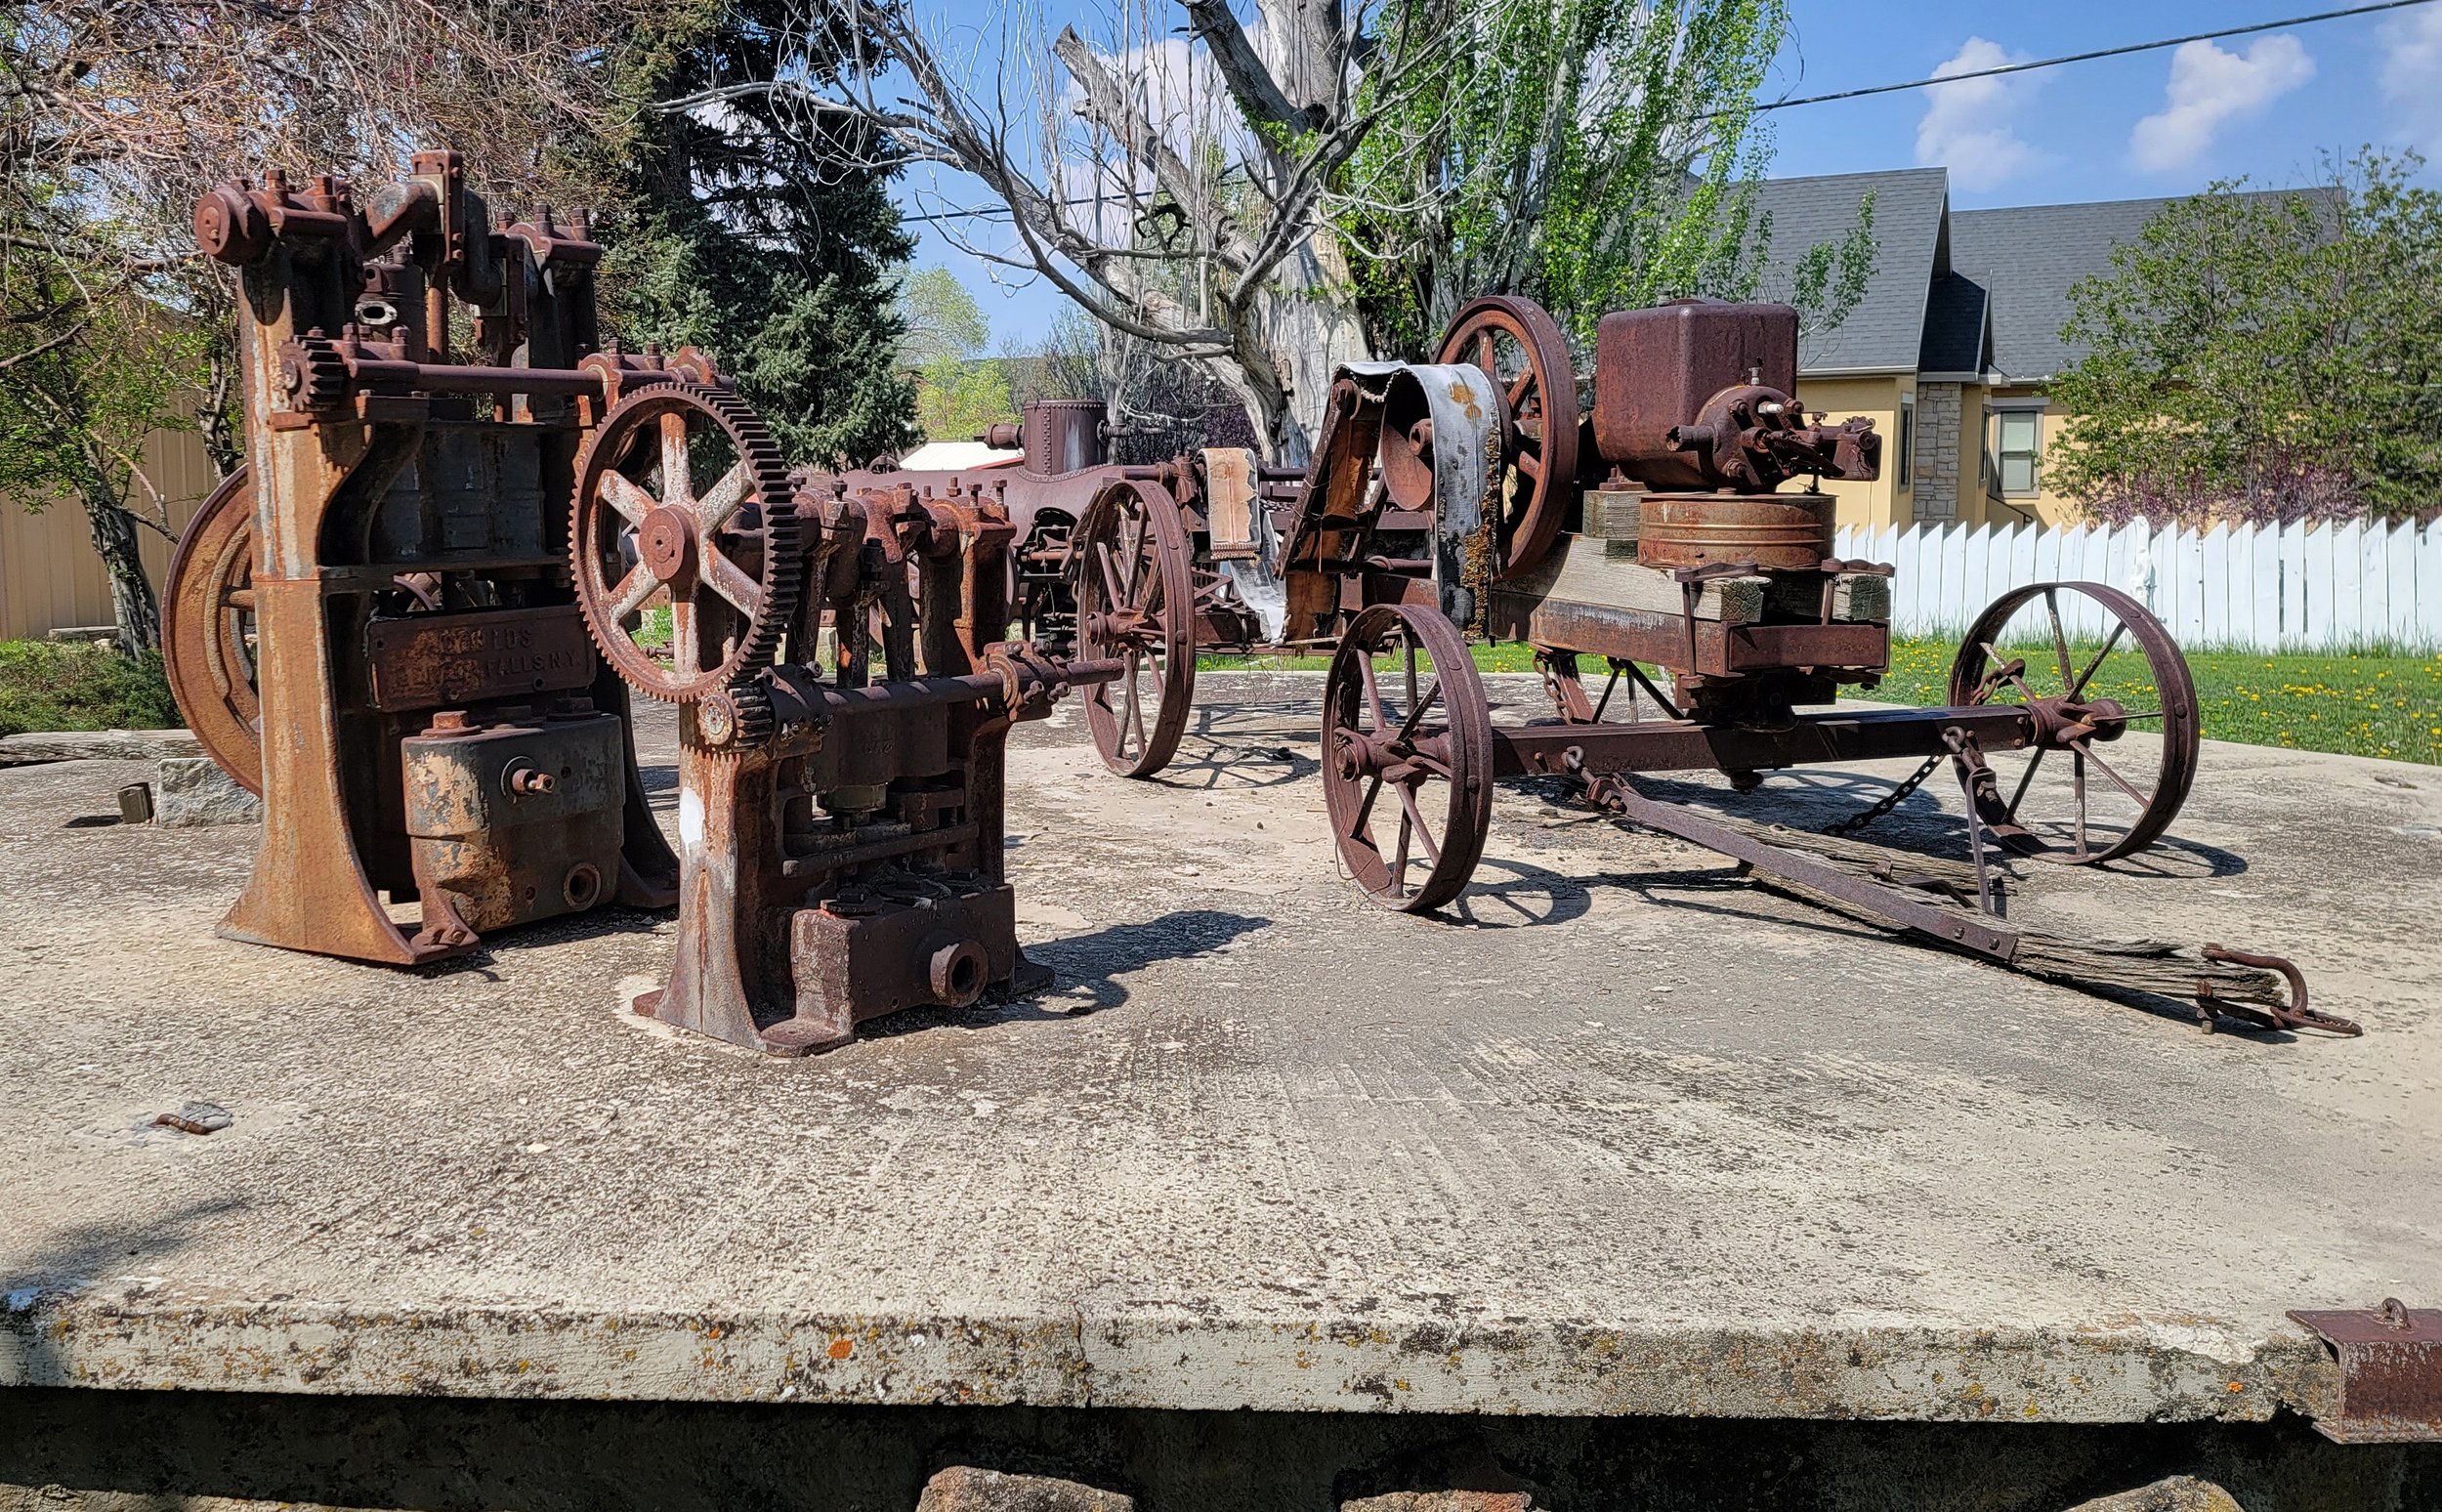 Museum was closed but they still have a bunch of old farm equipment on display outside.